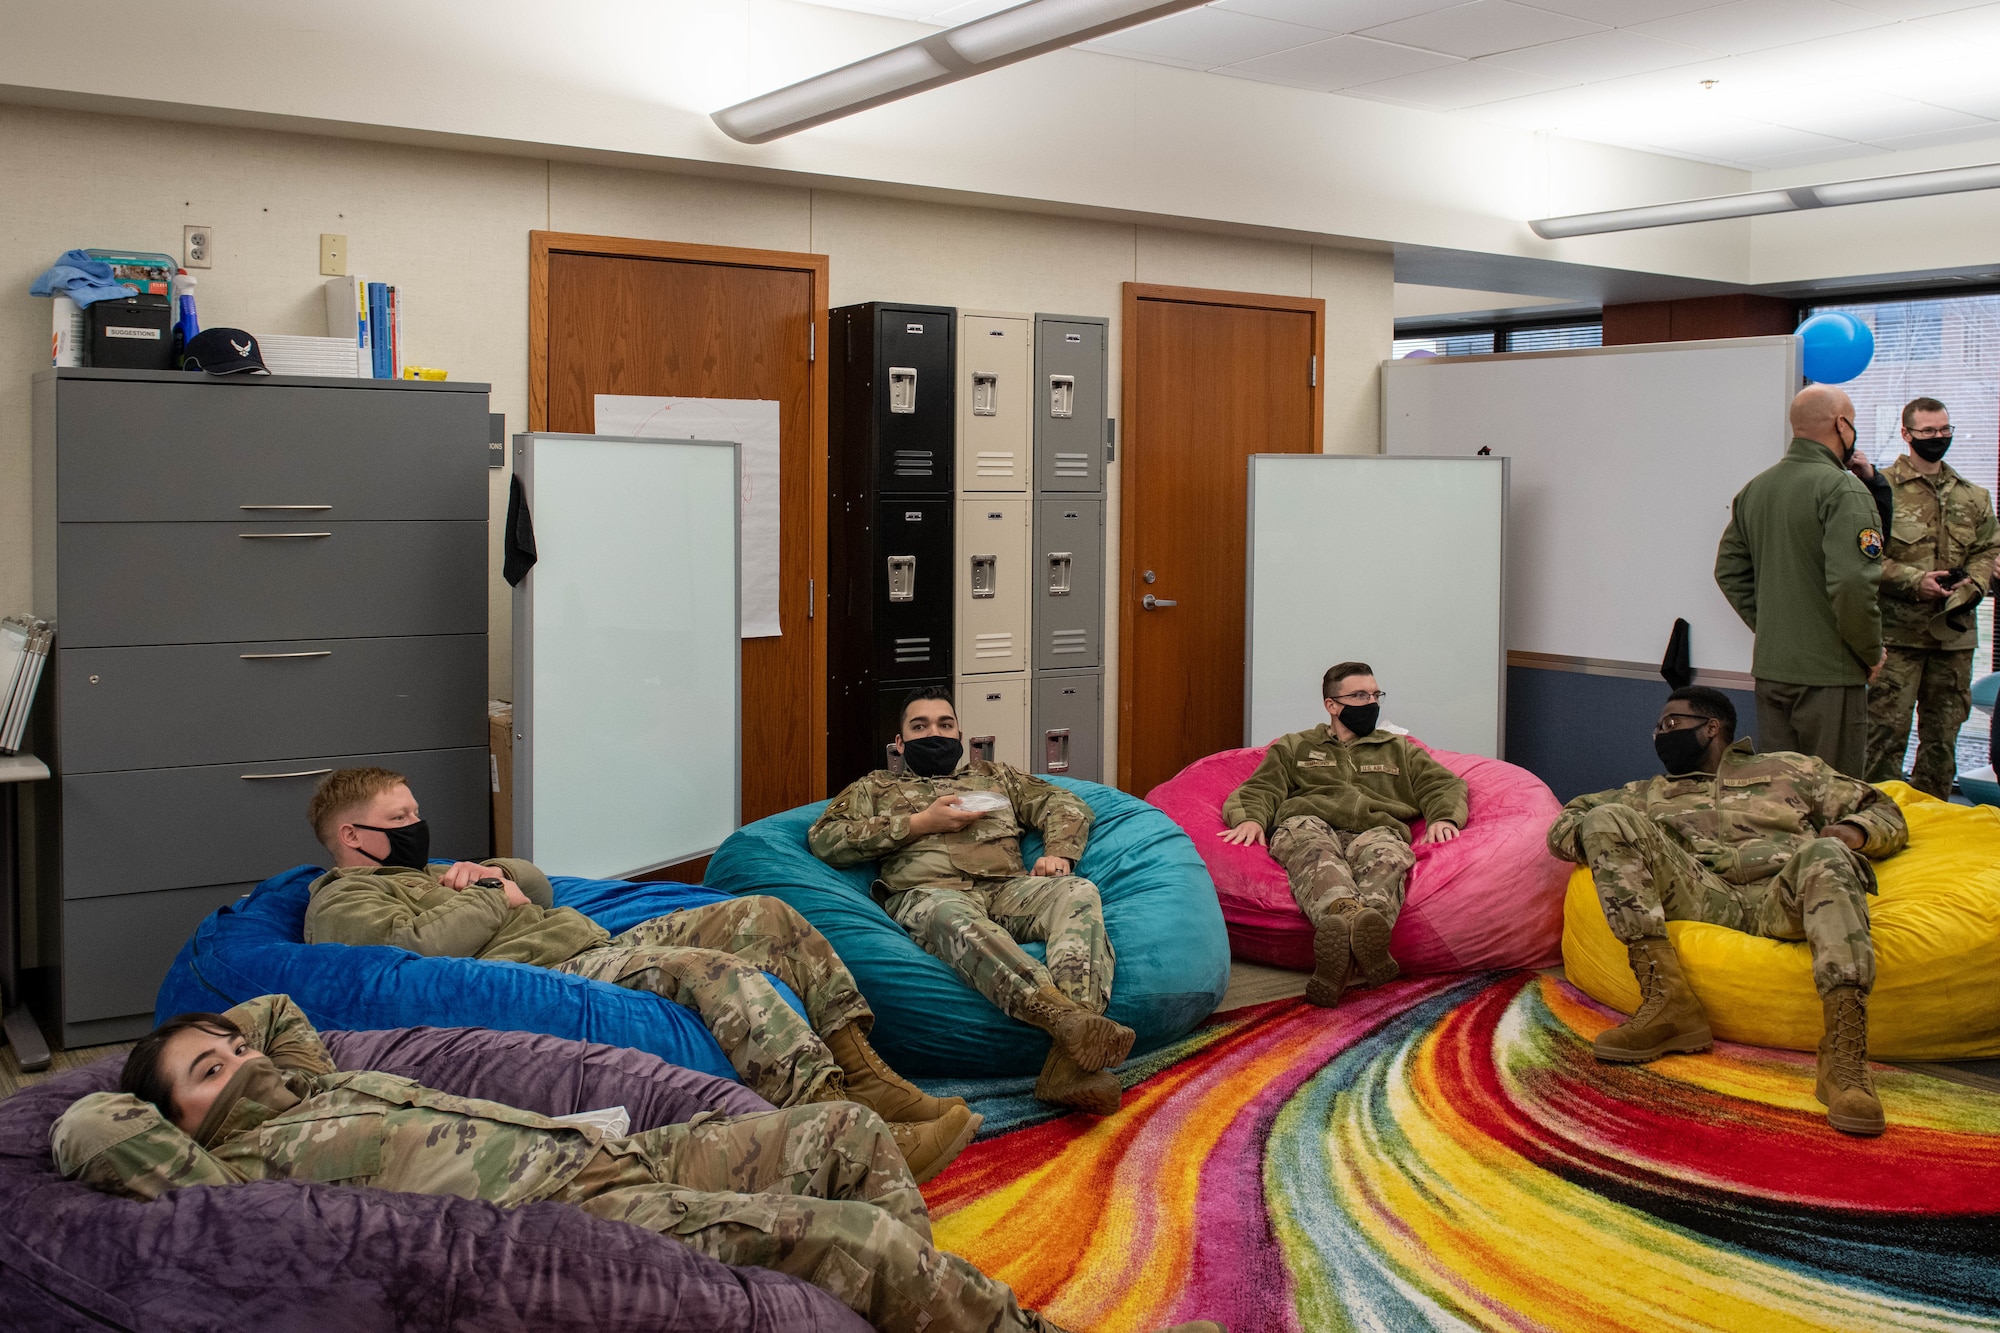 Airmen sit in bean bag chairs during the Raiderwerx open house and ribbon cutting event at Ellsworth Air Force Base, S.D., Nov. 19, 2021. Raiderwerx is led by a group of volunteers and active innovators from across the Ellsworth community. (U.S. Air Force photo by Senior Airman Quentin Marx)